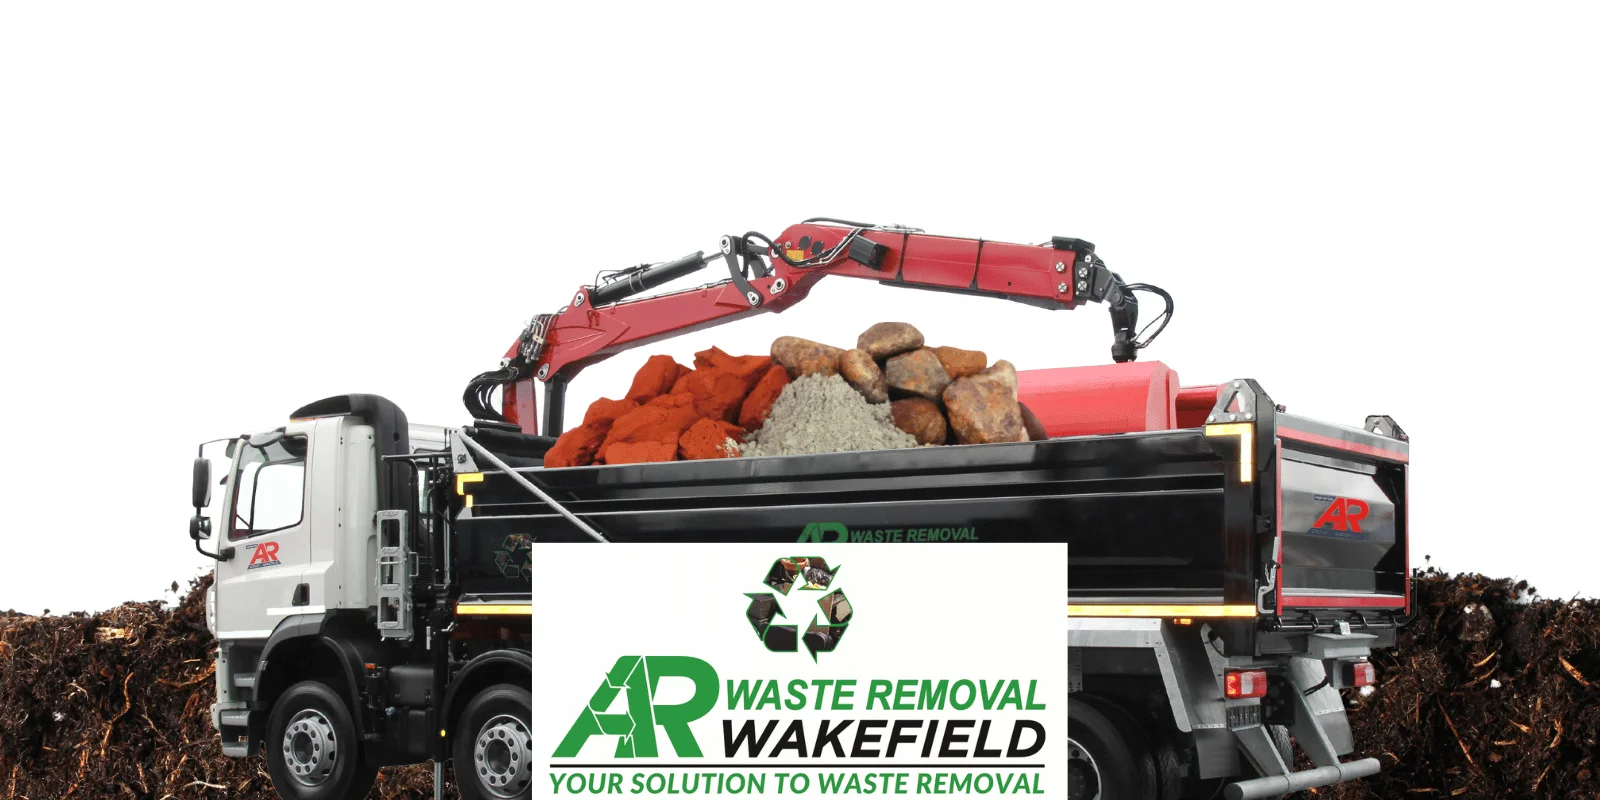 TRADE AND BUILDERS WASTE REMOVAL GRAB WAGON AR WASTE REMOVAL WAKEFIELD